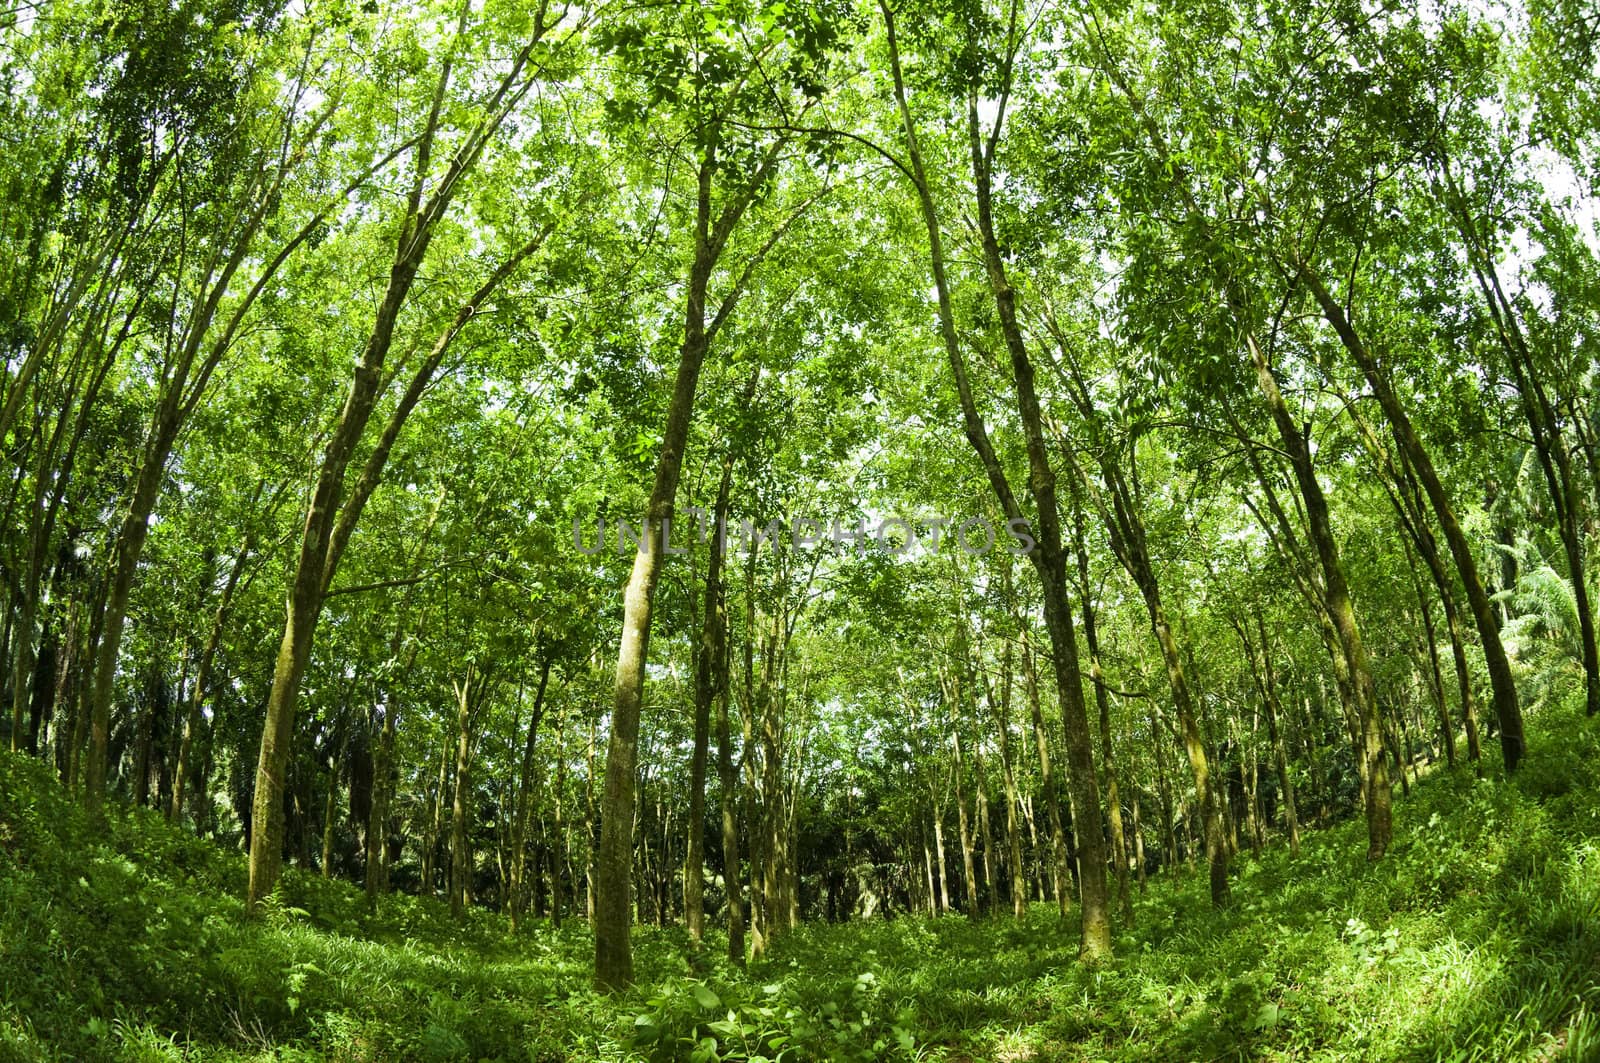 Fish eye view landscape of rubber trees